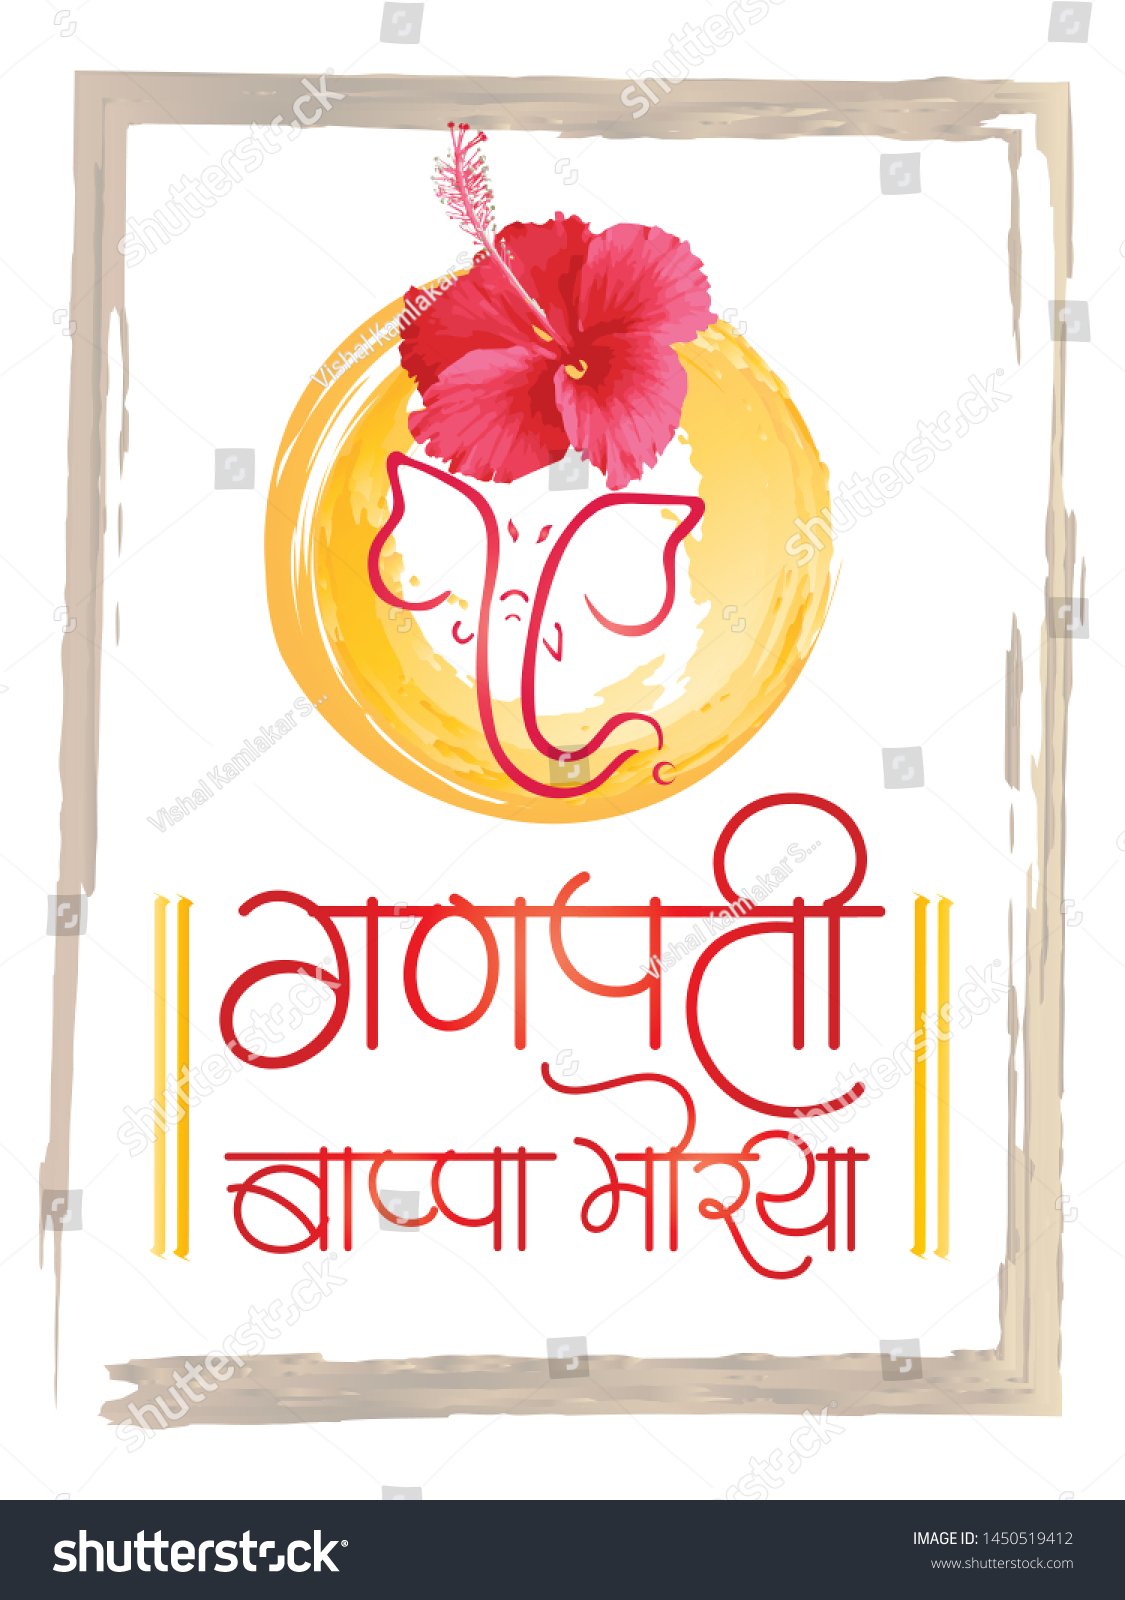 Marathi Calligraphy Bappa Meaning My Lord Stock Vector (Royalty Free ...